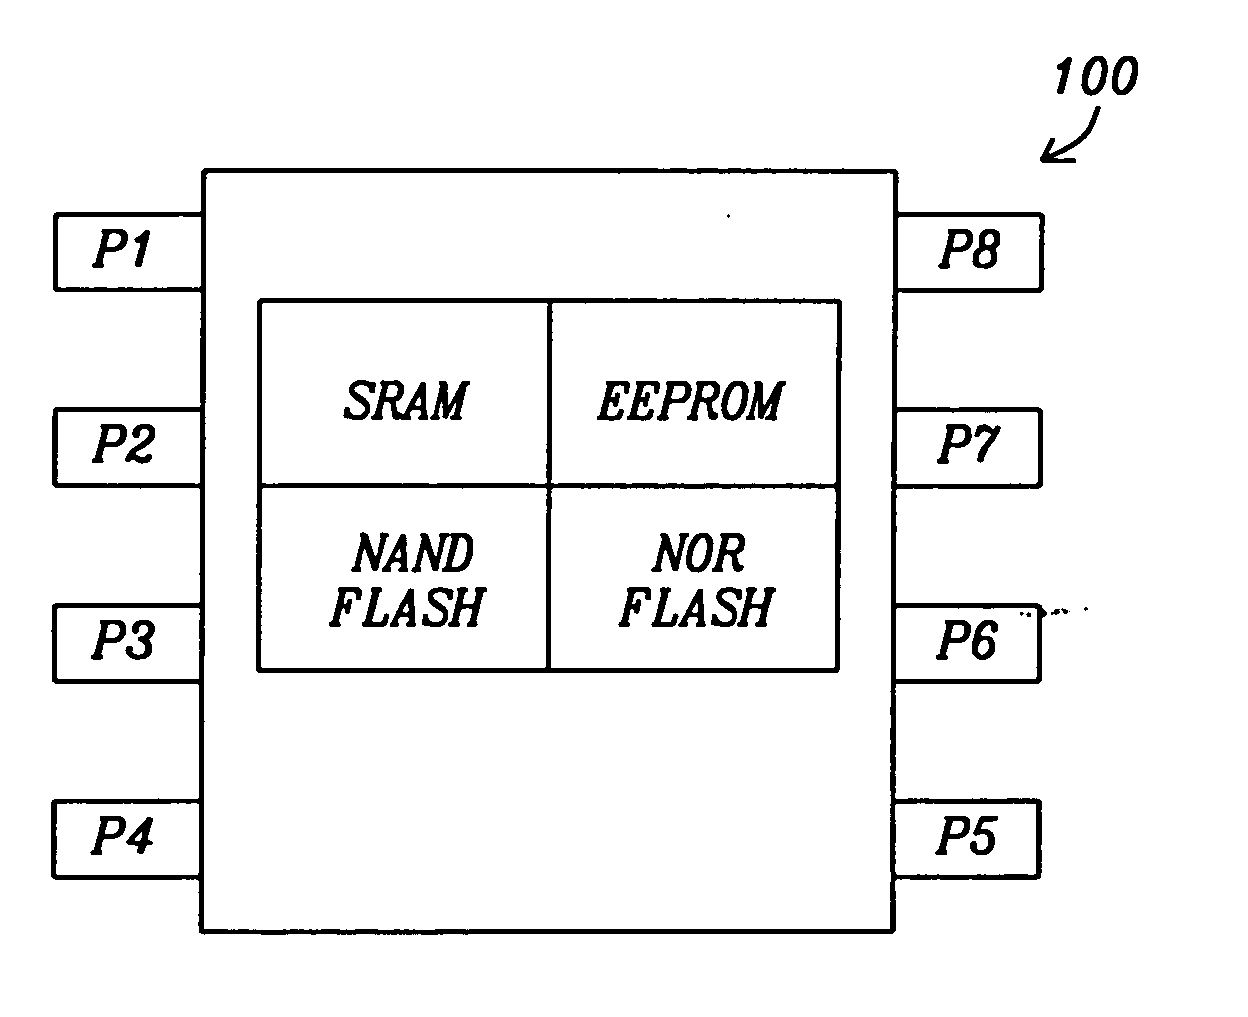 Different types of memory integrated in one chip by using a novel protocol